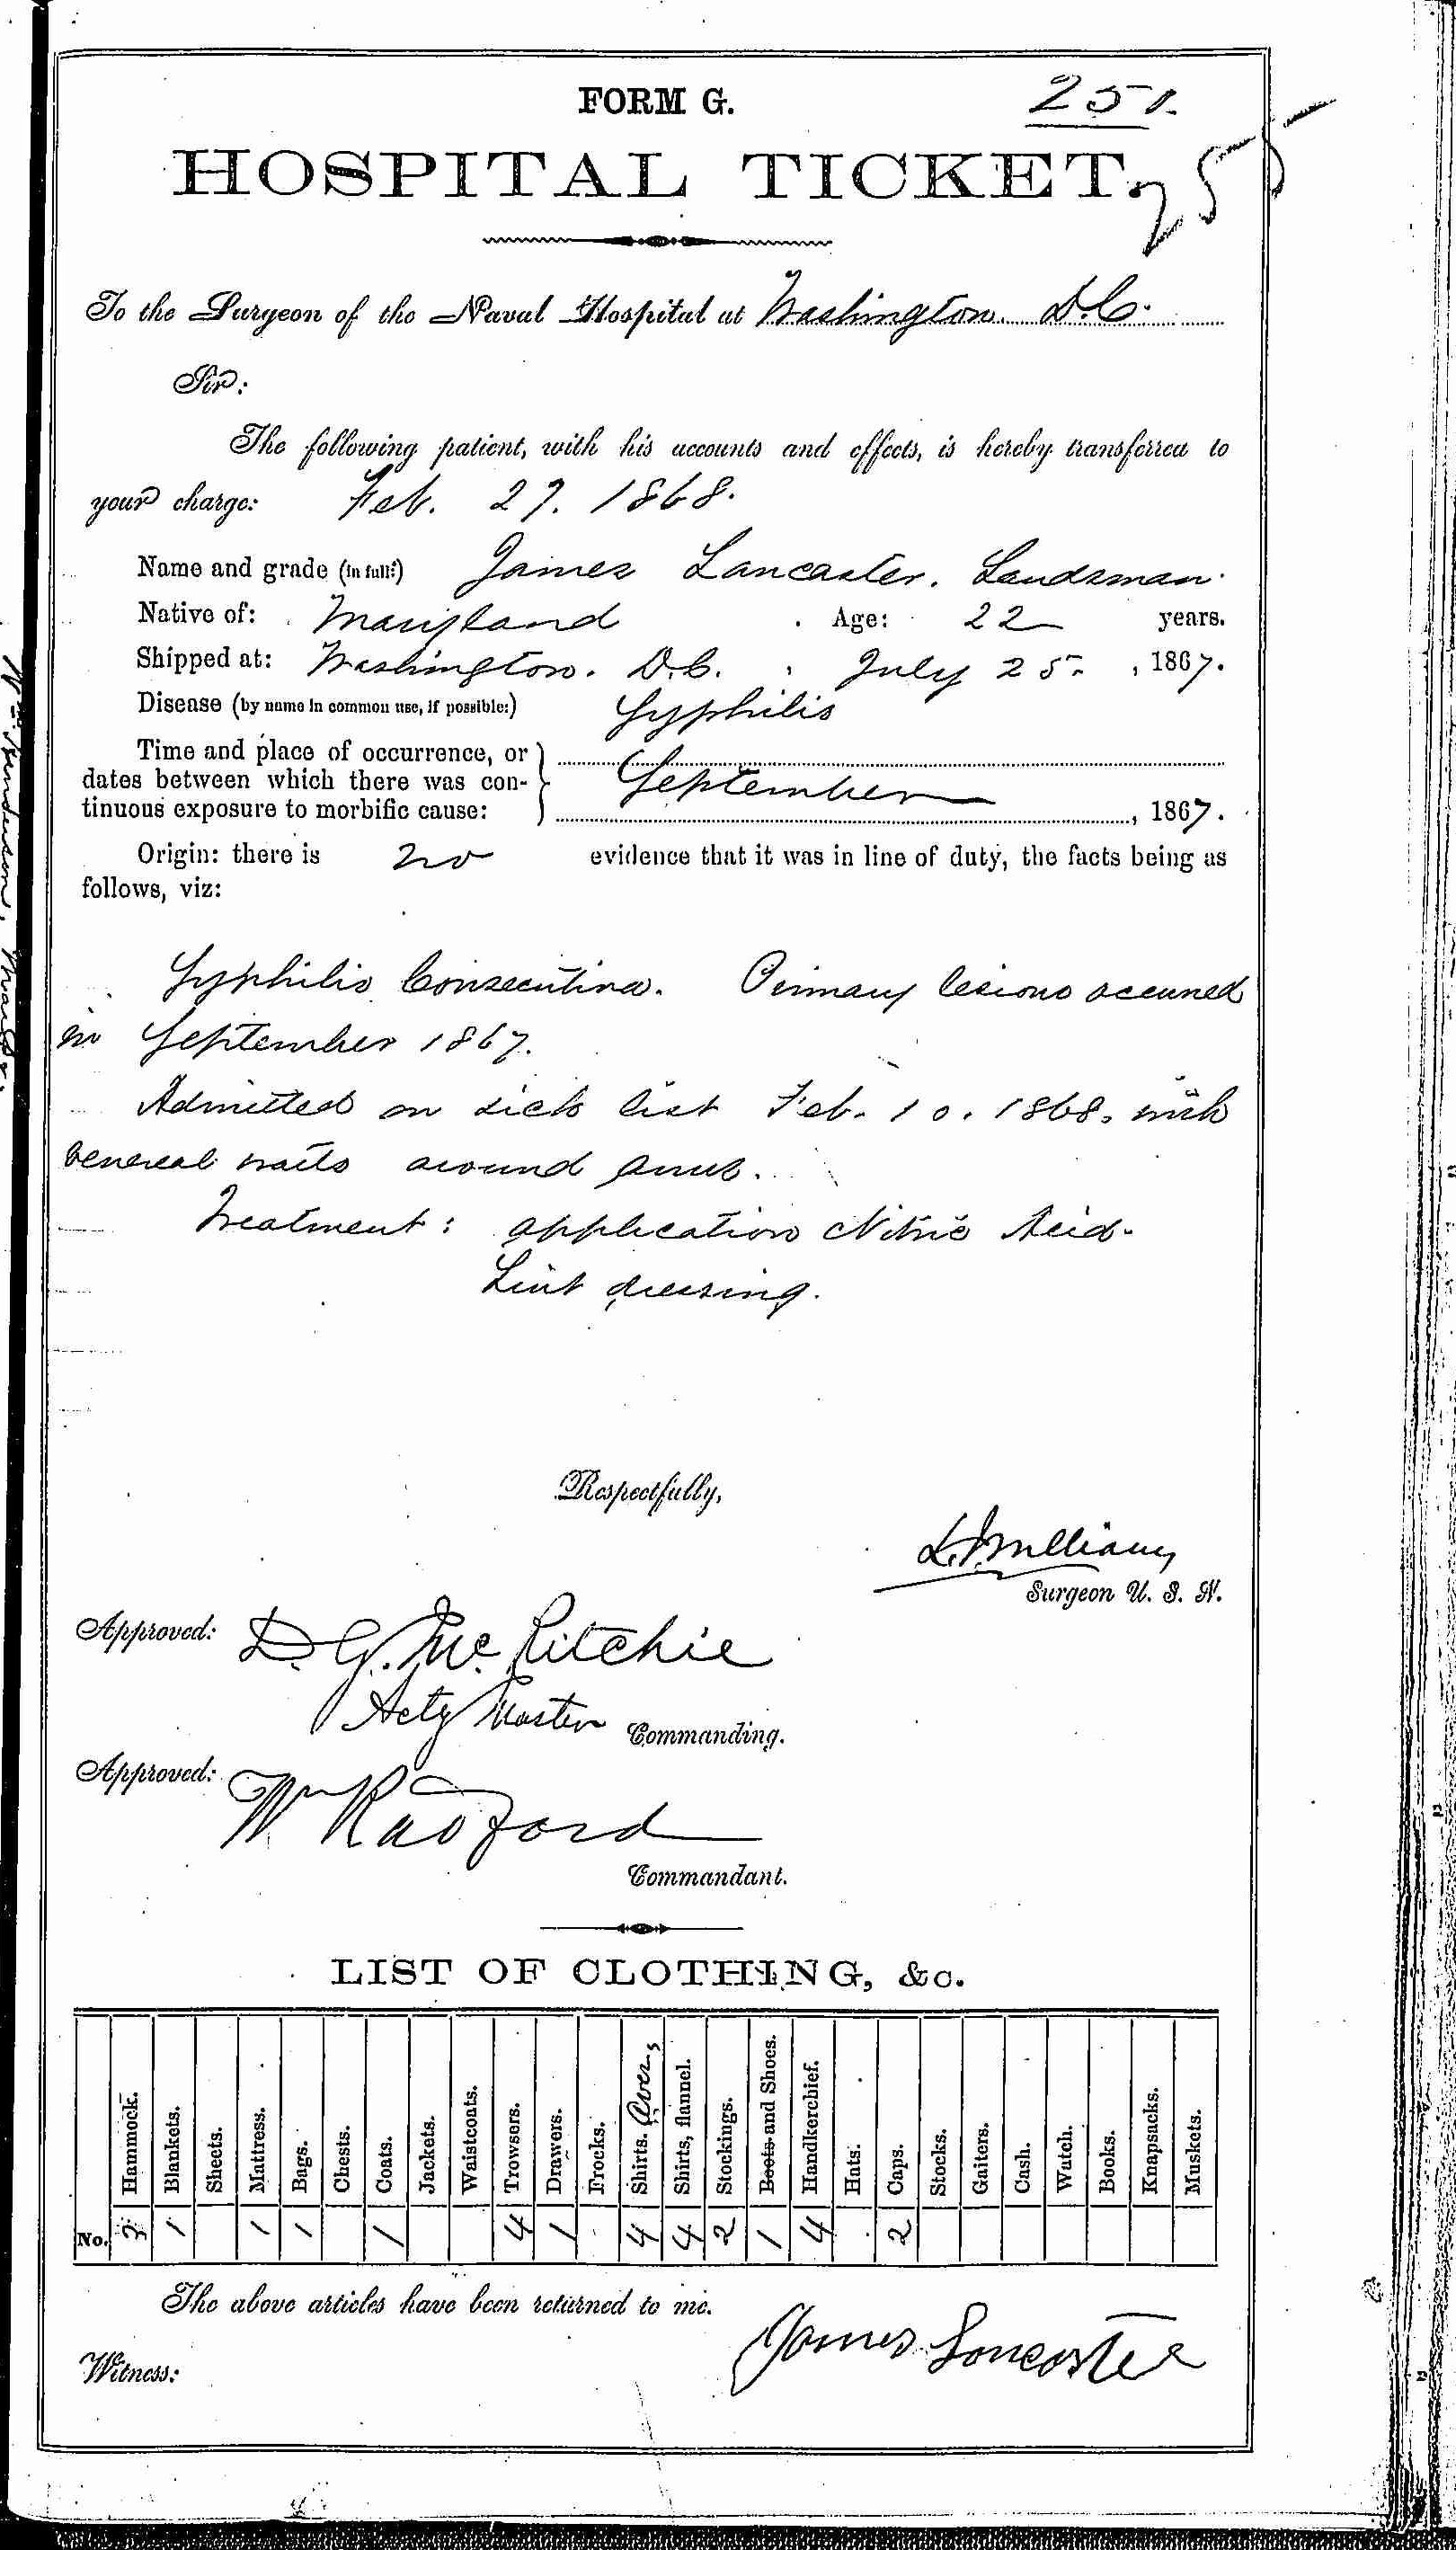 Entry for James Lancaster (page 1 of 2) in the log Hospital Tickets and Case Papers - Naval Hospital - Washington, D.C. - 1866-68